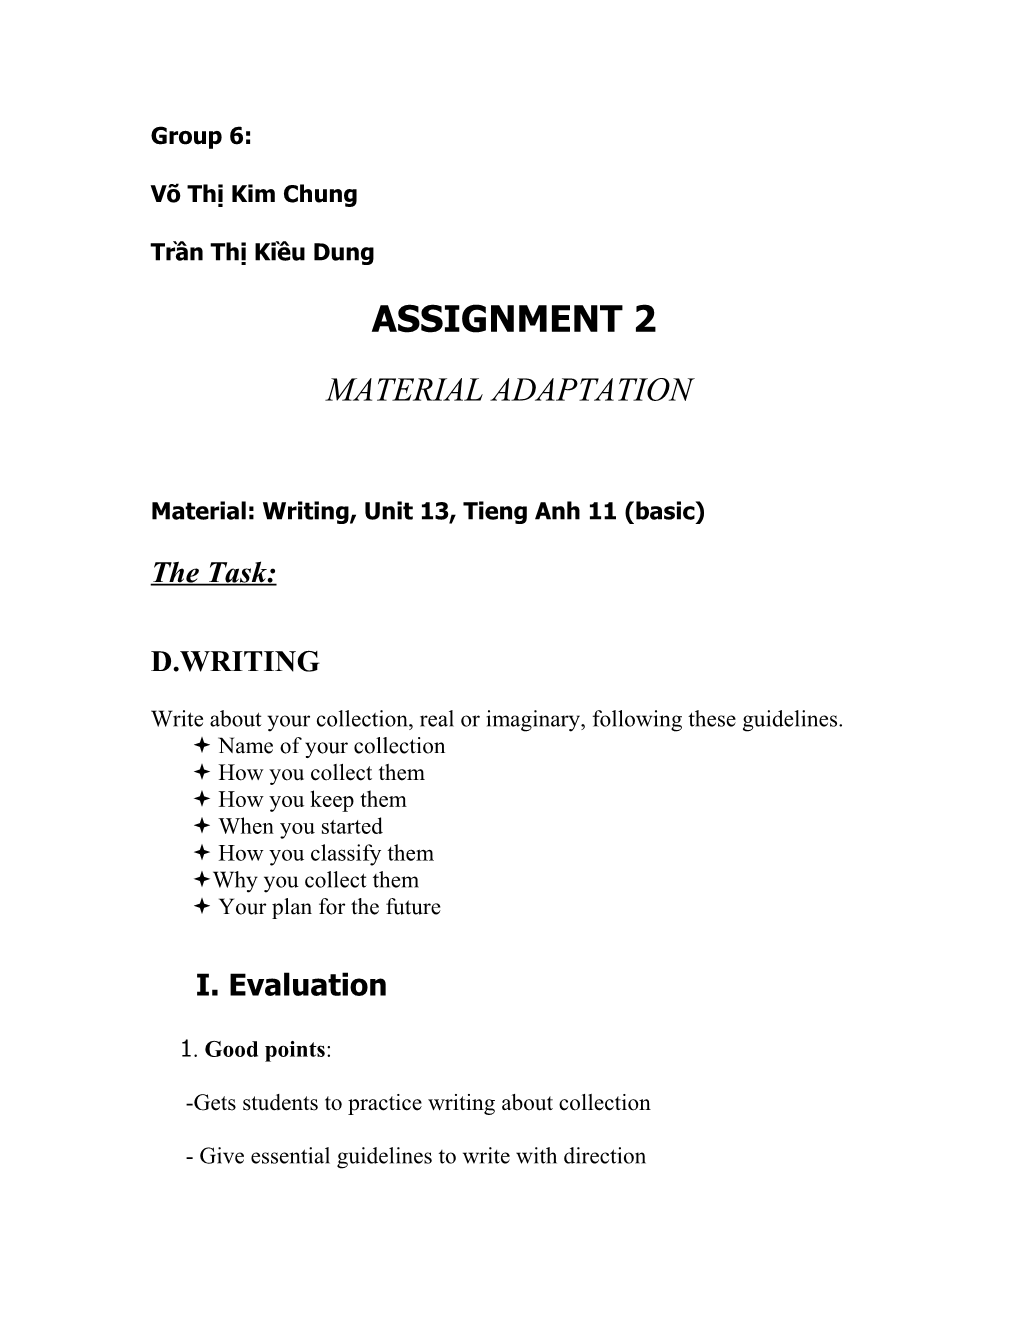 Material: Writing, Unit 13, Tieng Anh 11 (Basic)